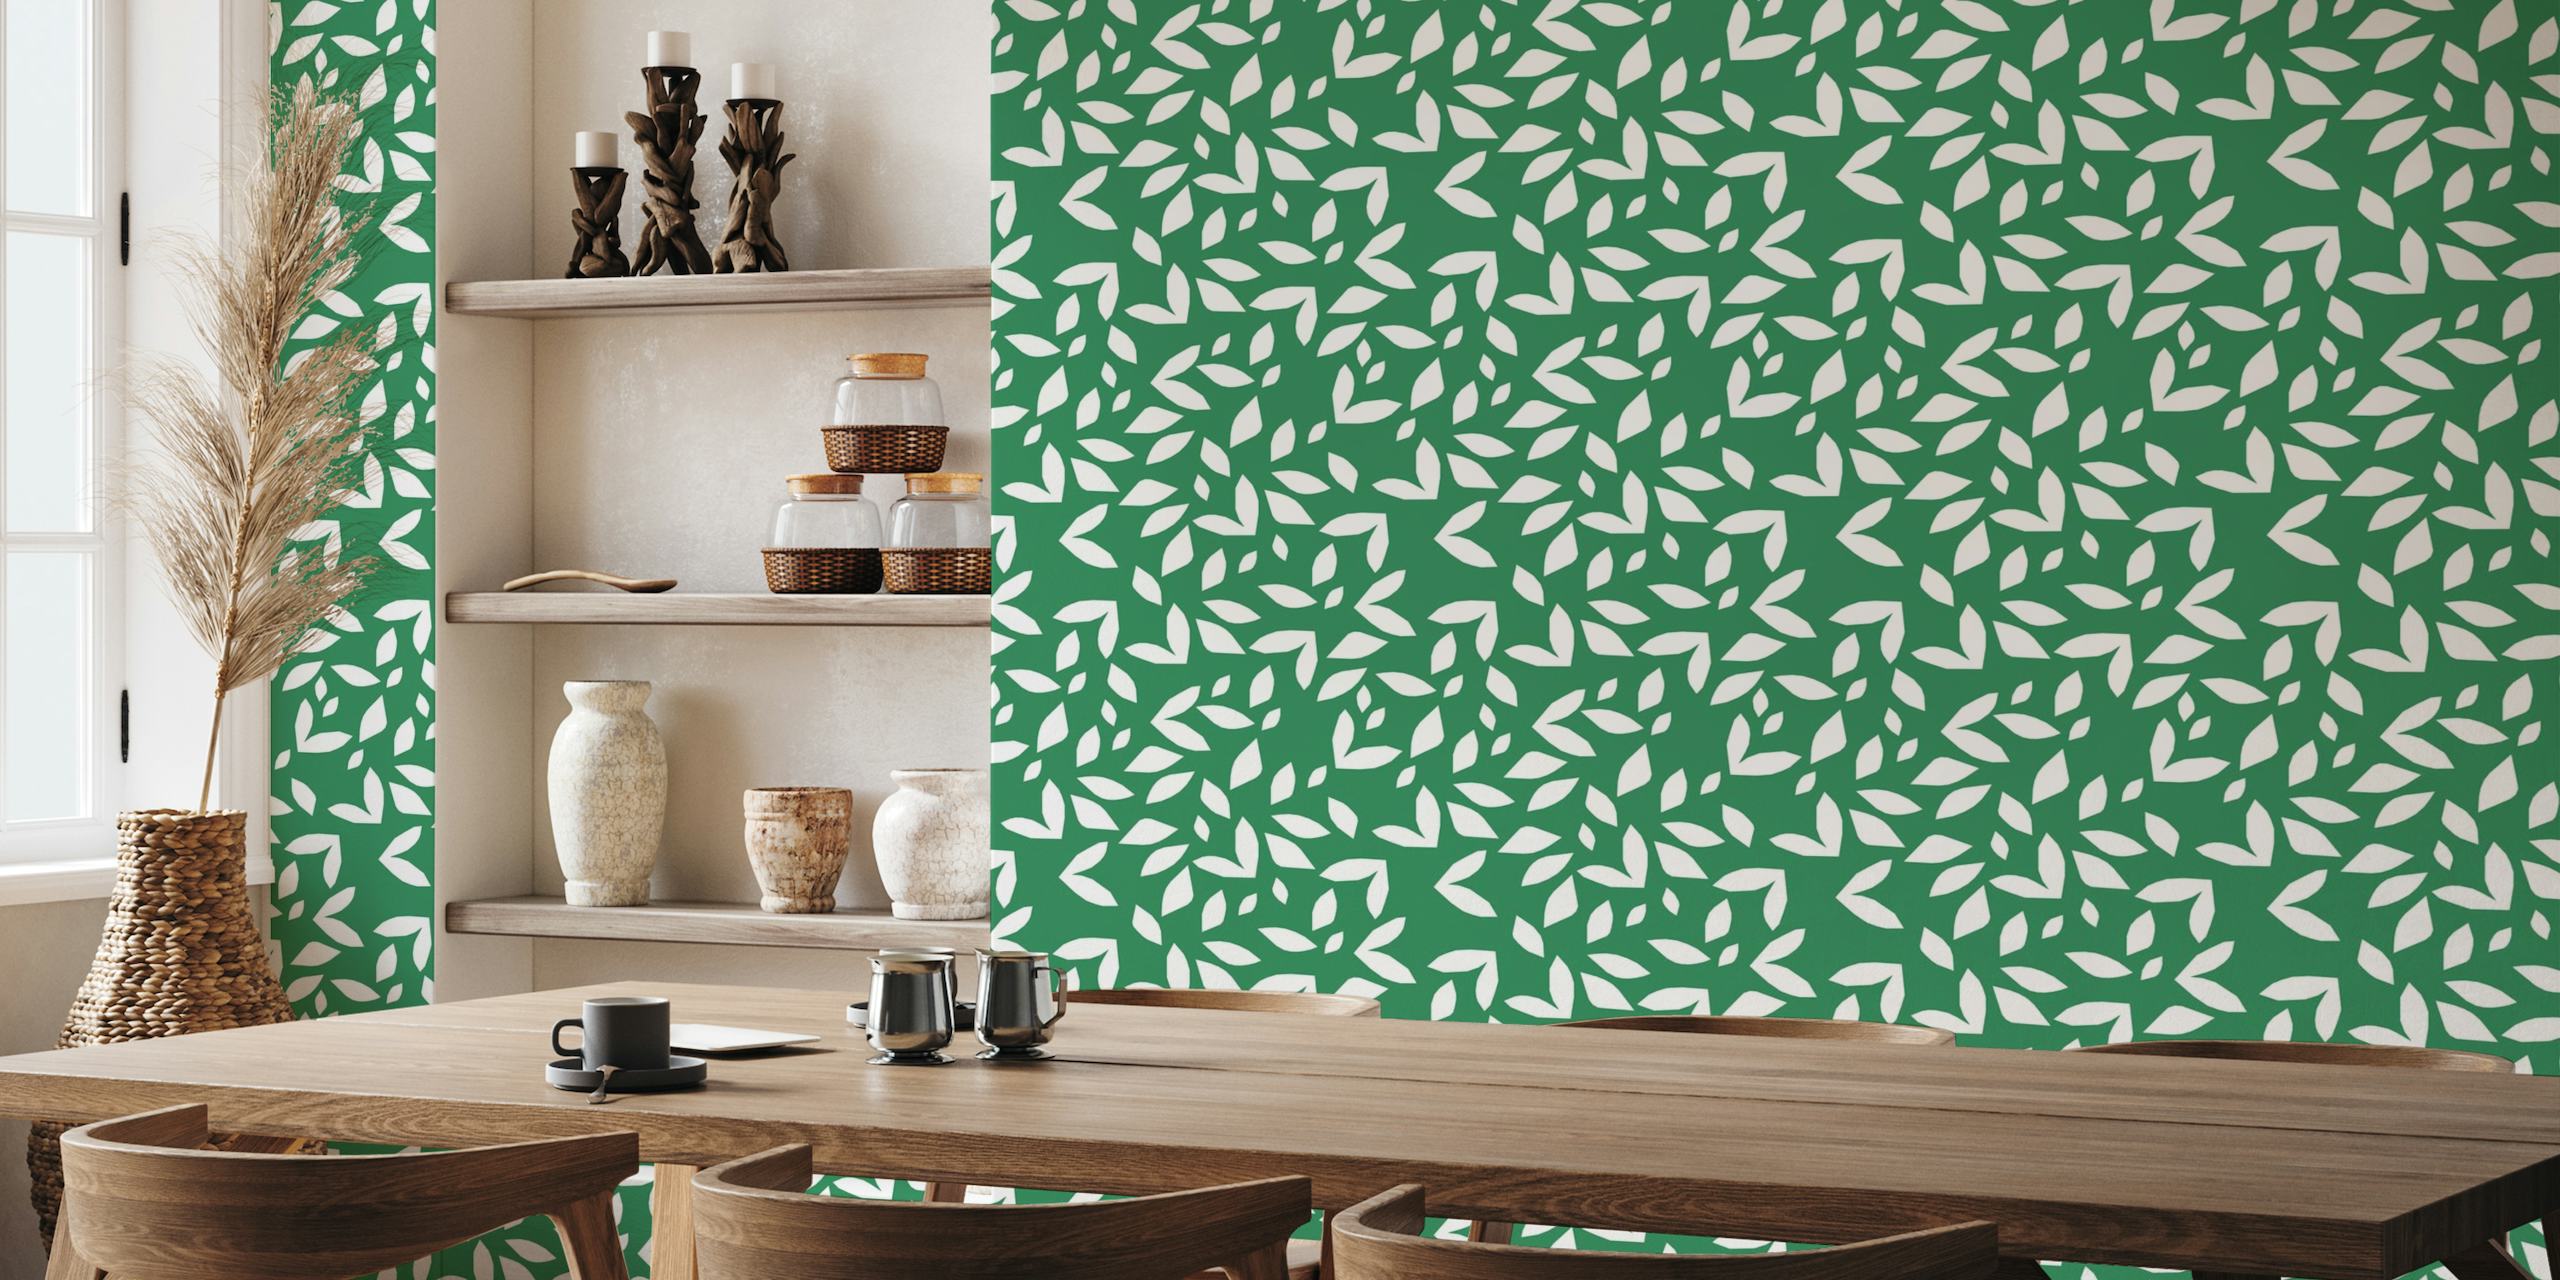 Green leaves pattern wall mural depicting autumn foliage